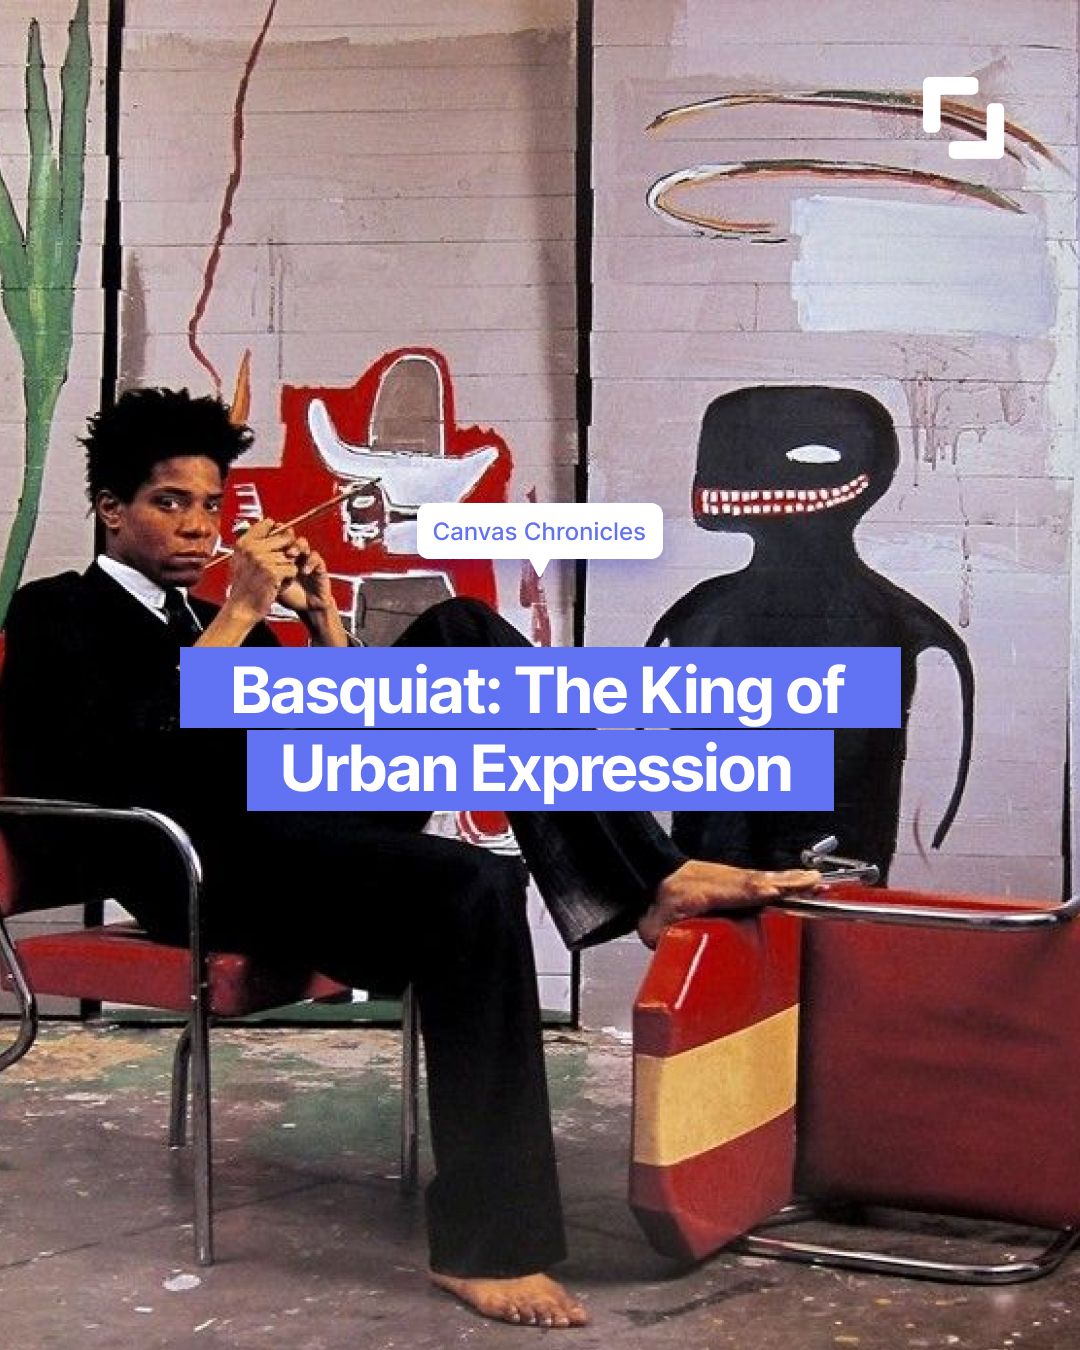 Basquiat: The King of Urban Expression